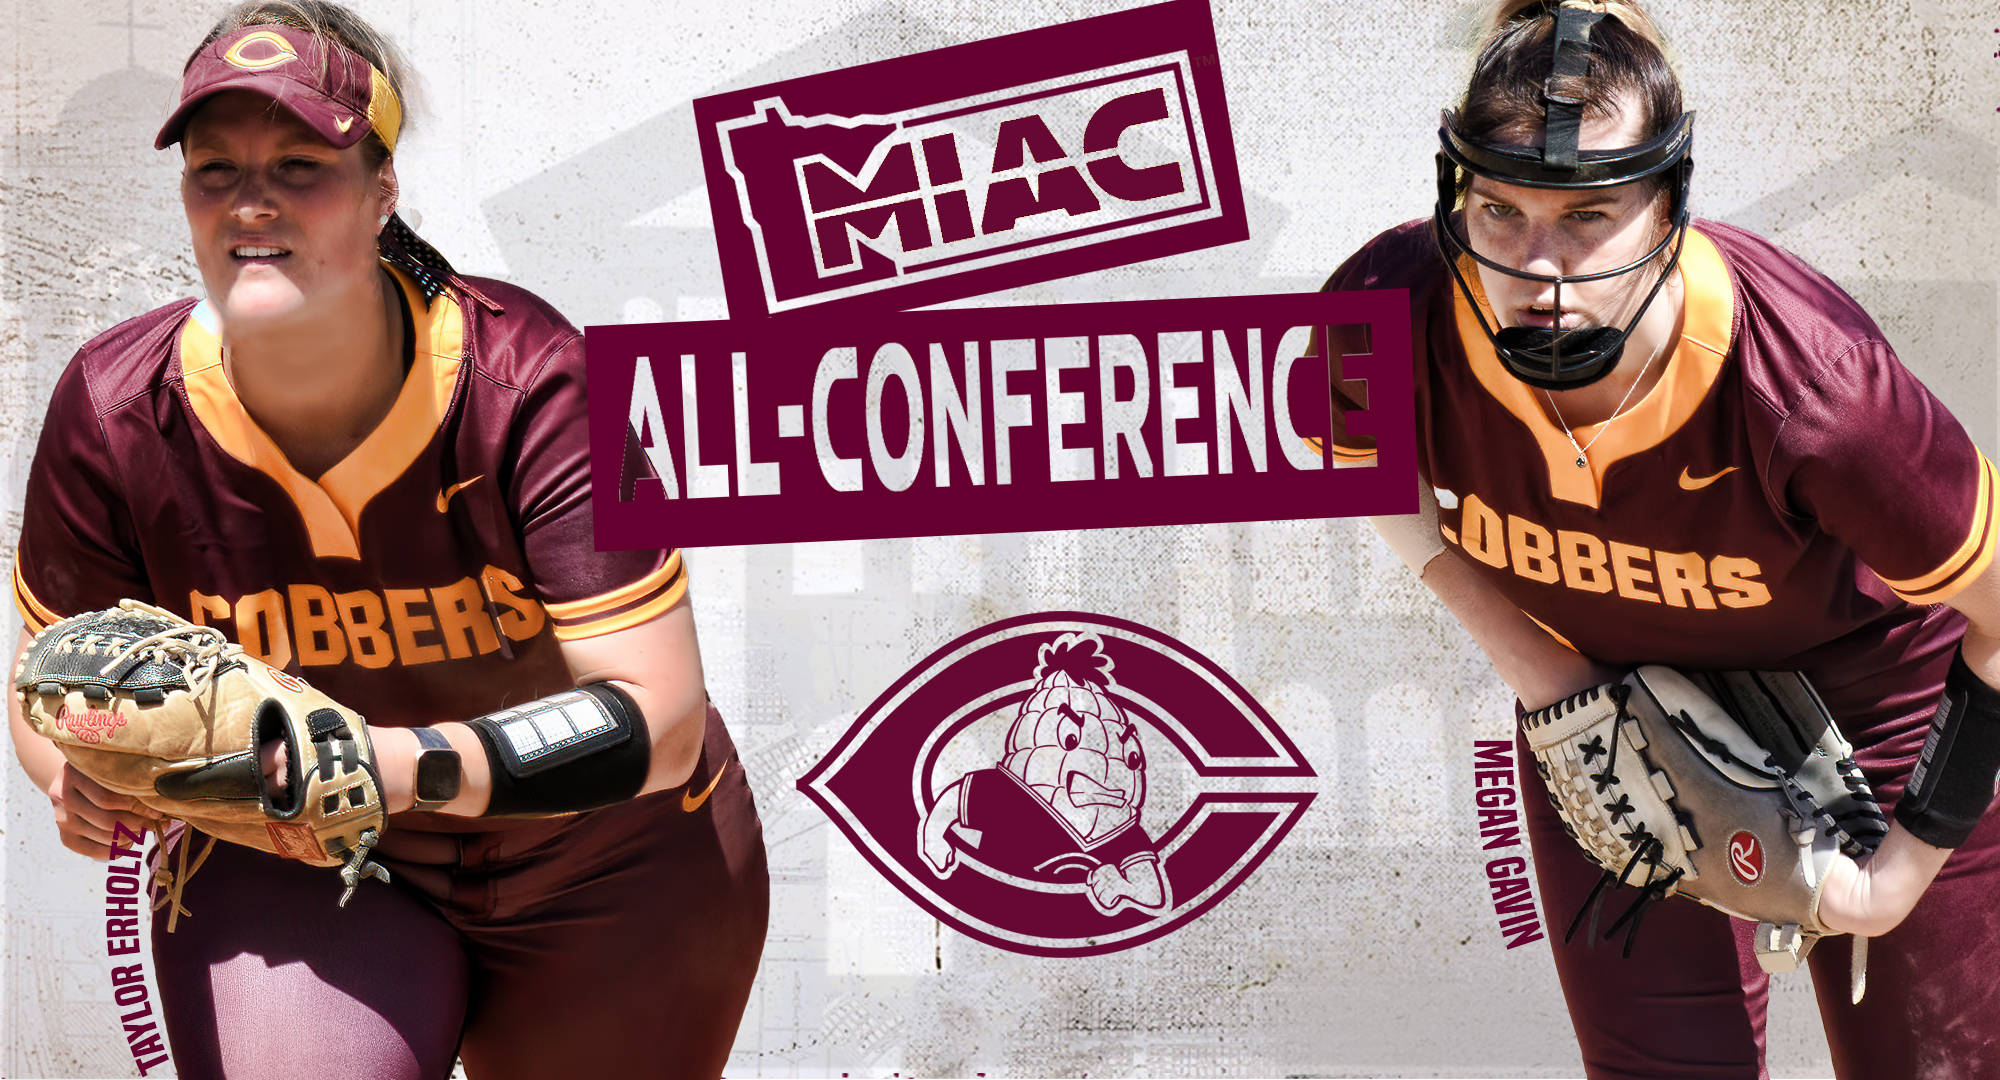 Concordia seniors Taylor Erholtz (L) and Megan Gavin capped their conference-playoff season by being voted on the MIAC postseason award list by the league coaches.